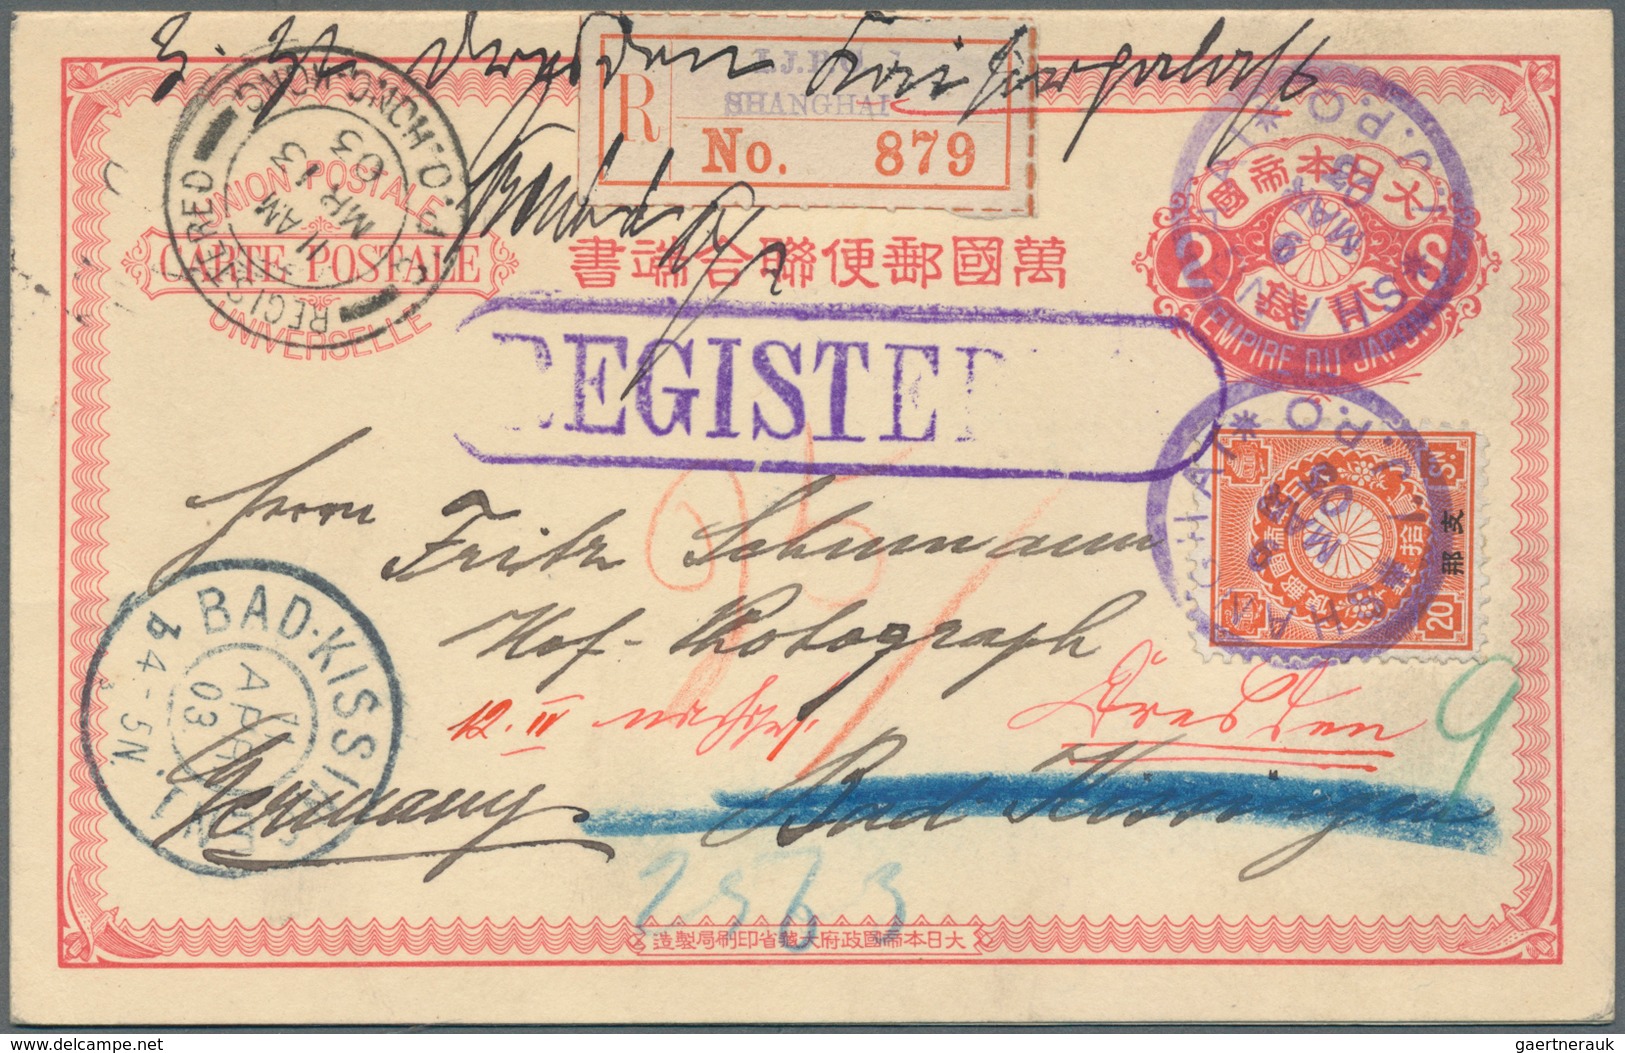 09009 Japanische Post In China: 1892, UPU Ereply Card 2+2 Sen Uprated Offices In China 1899 20 S. Both Can - 1943-45 Shanghai & Nanjing